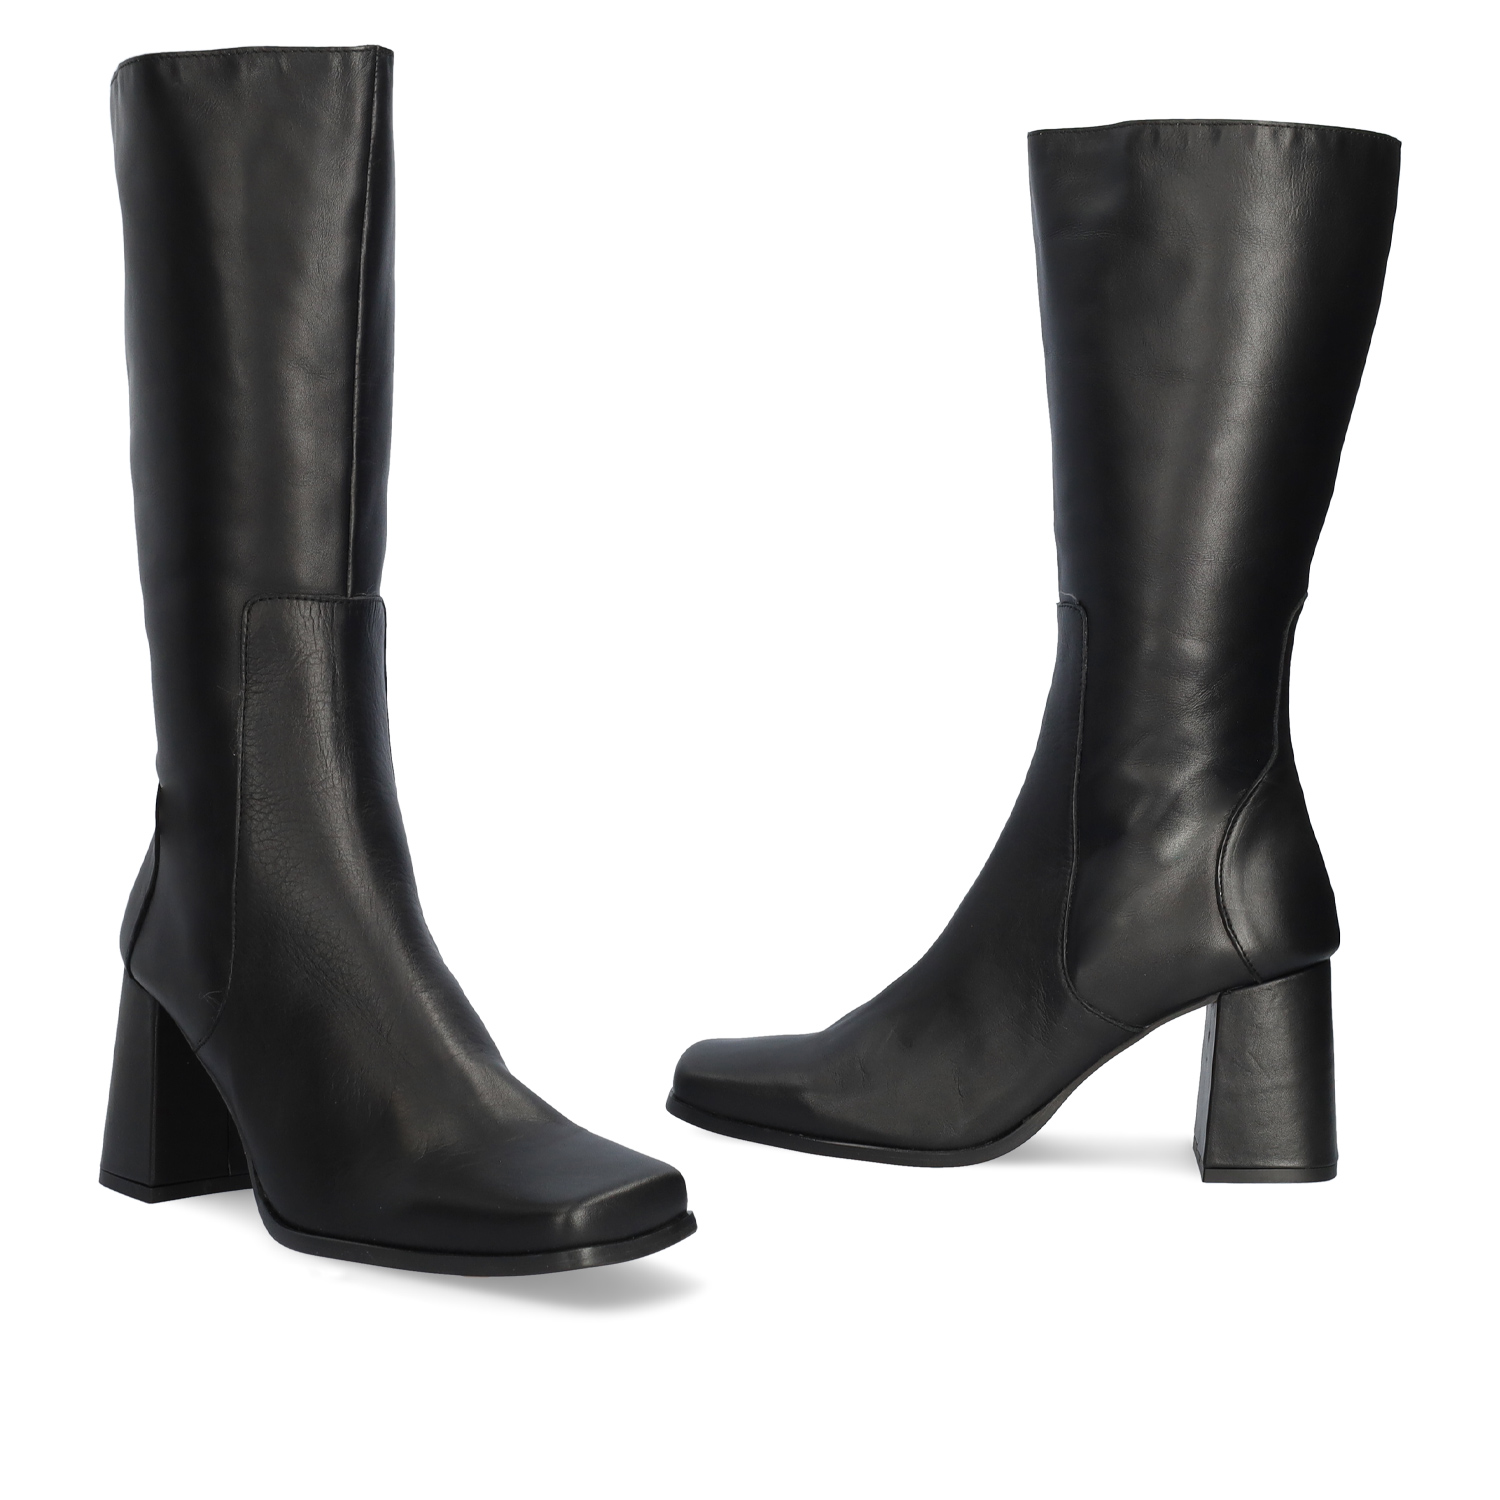 Heeled boots in black leather 